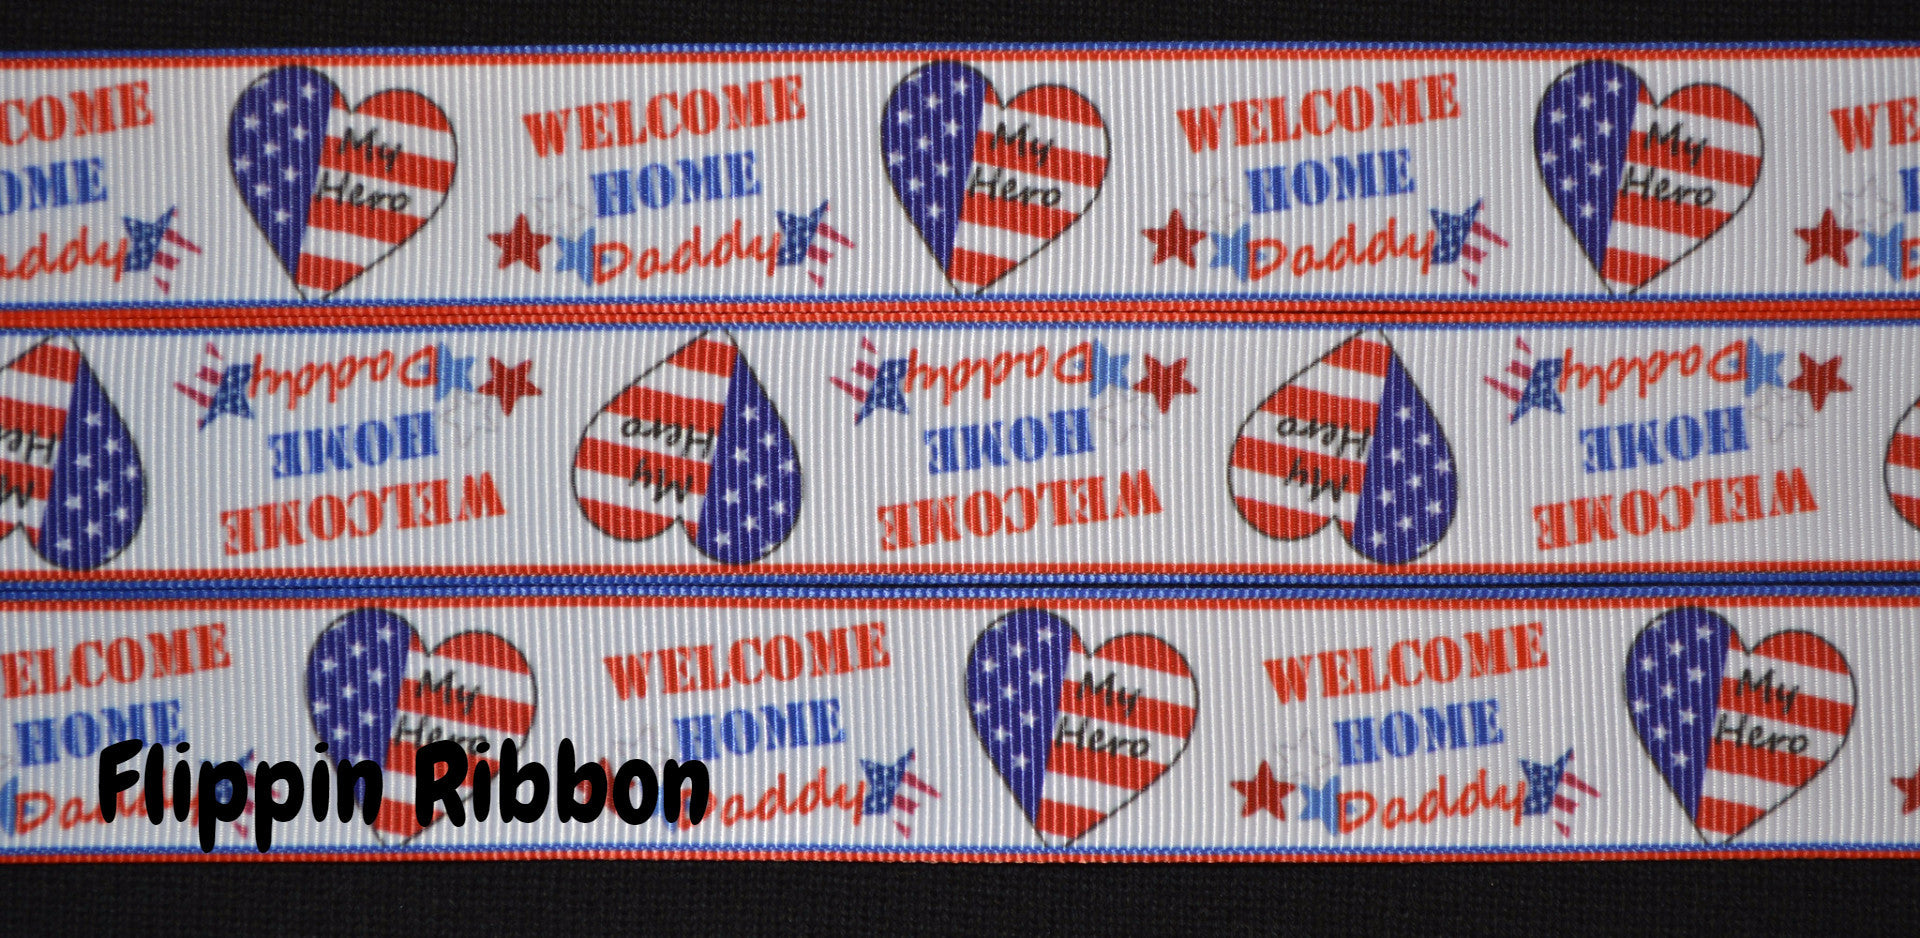 Welcome Home Daddy Ribbon - Flippin Ribbon